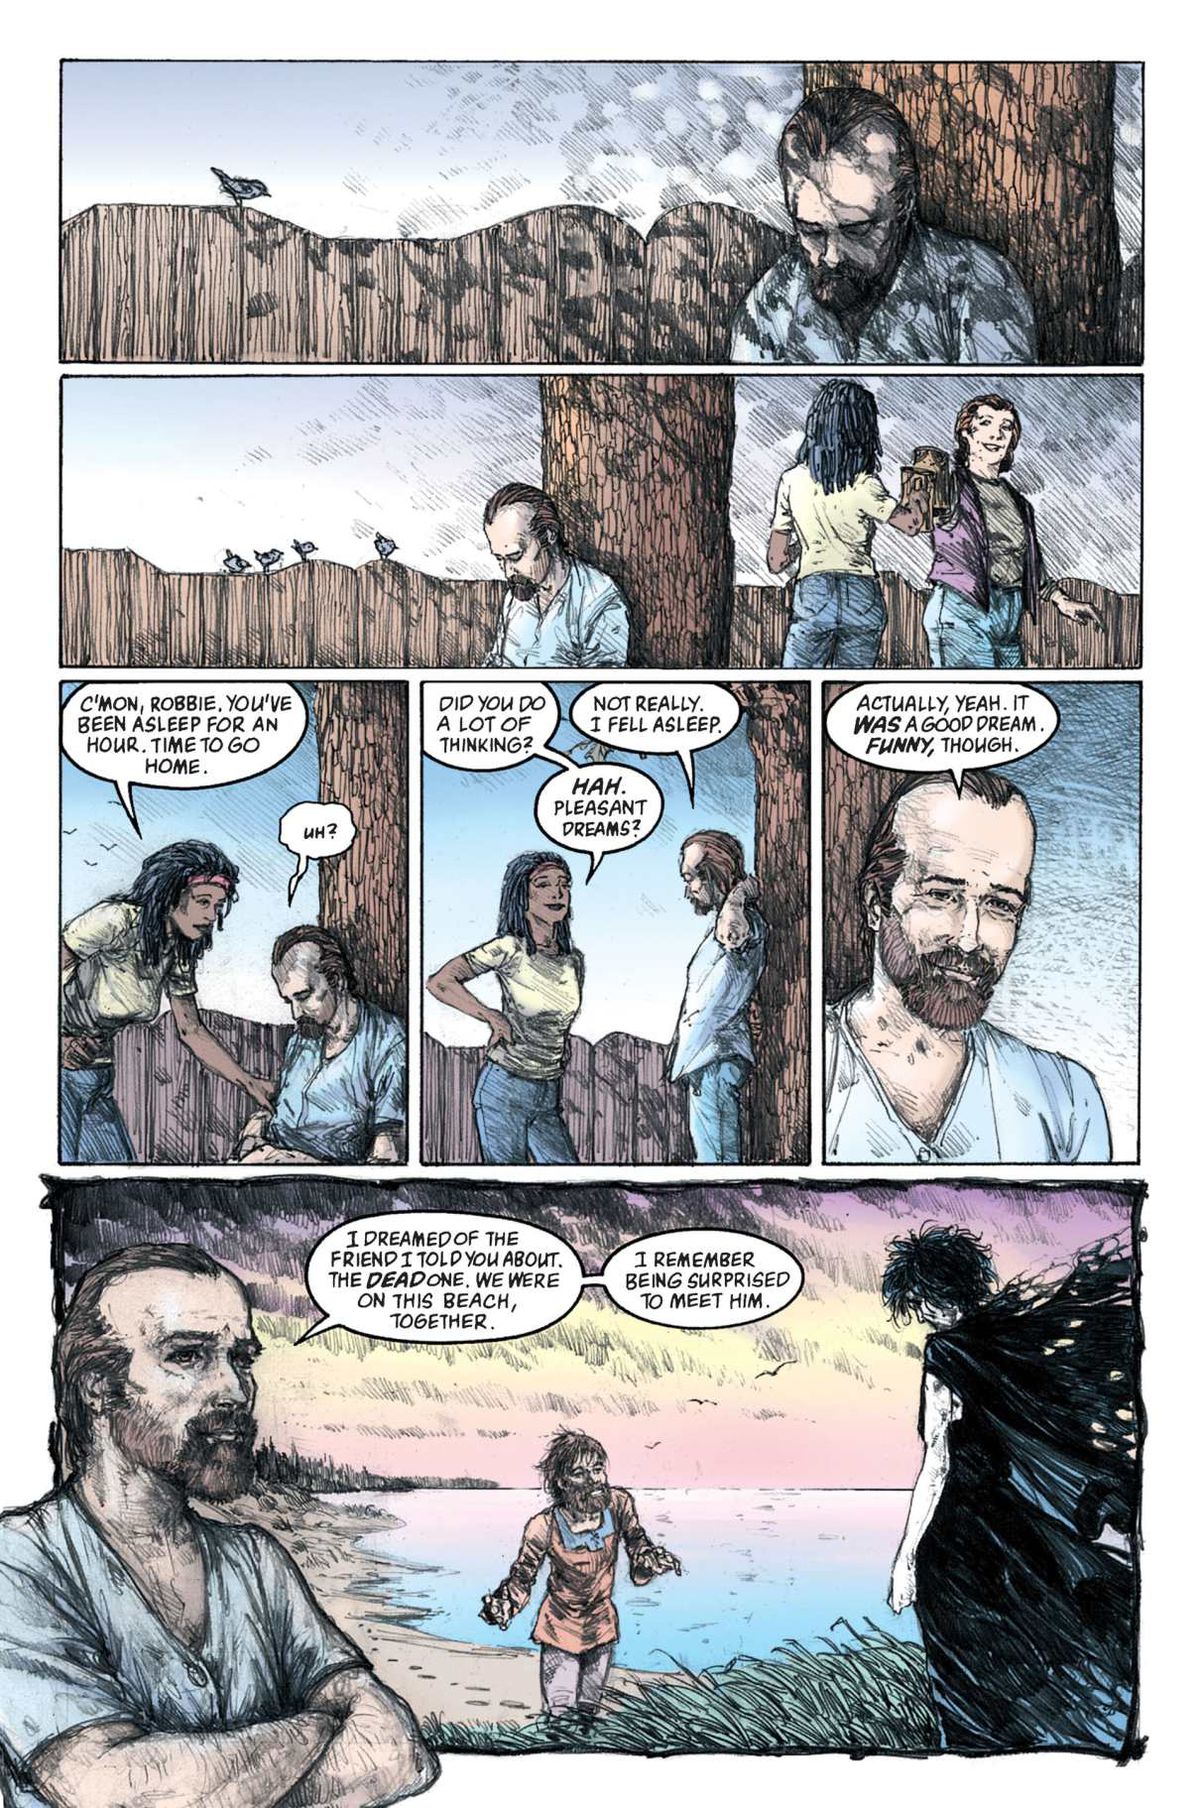 A page from issue #73, 'An Epilogue, Sunday Mourning', by The Sandman.